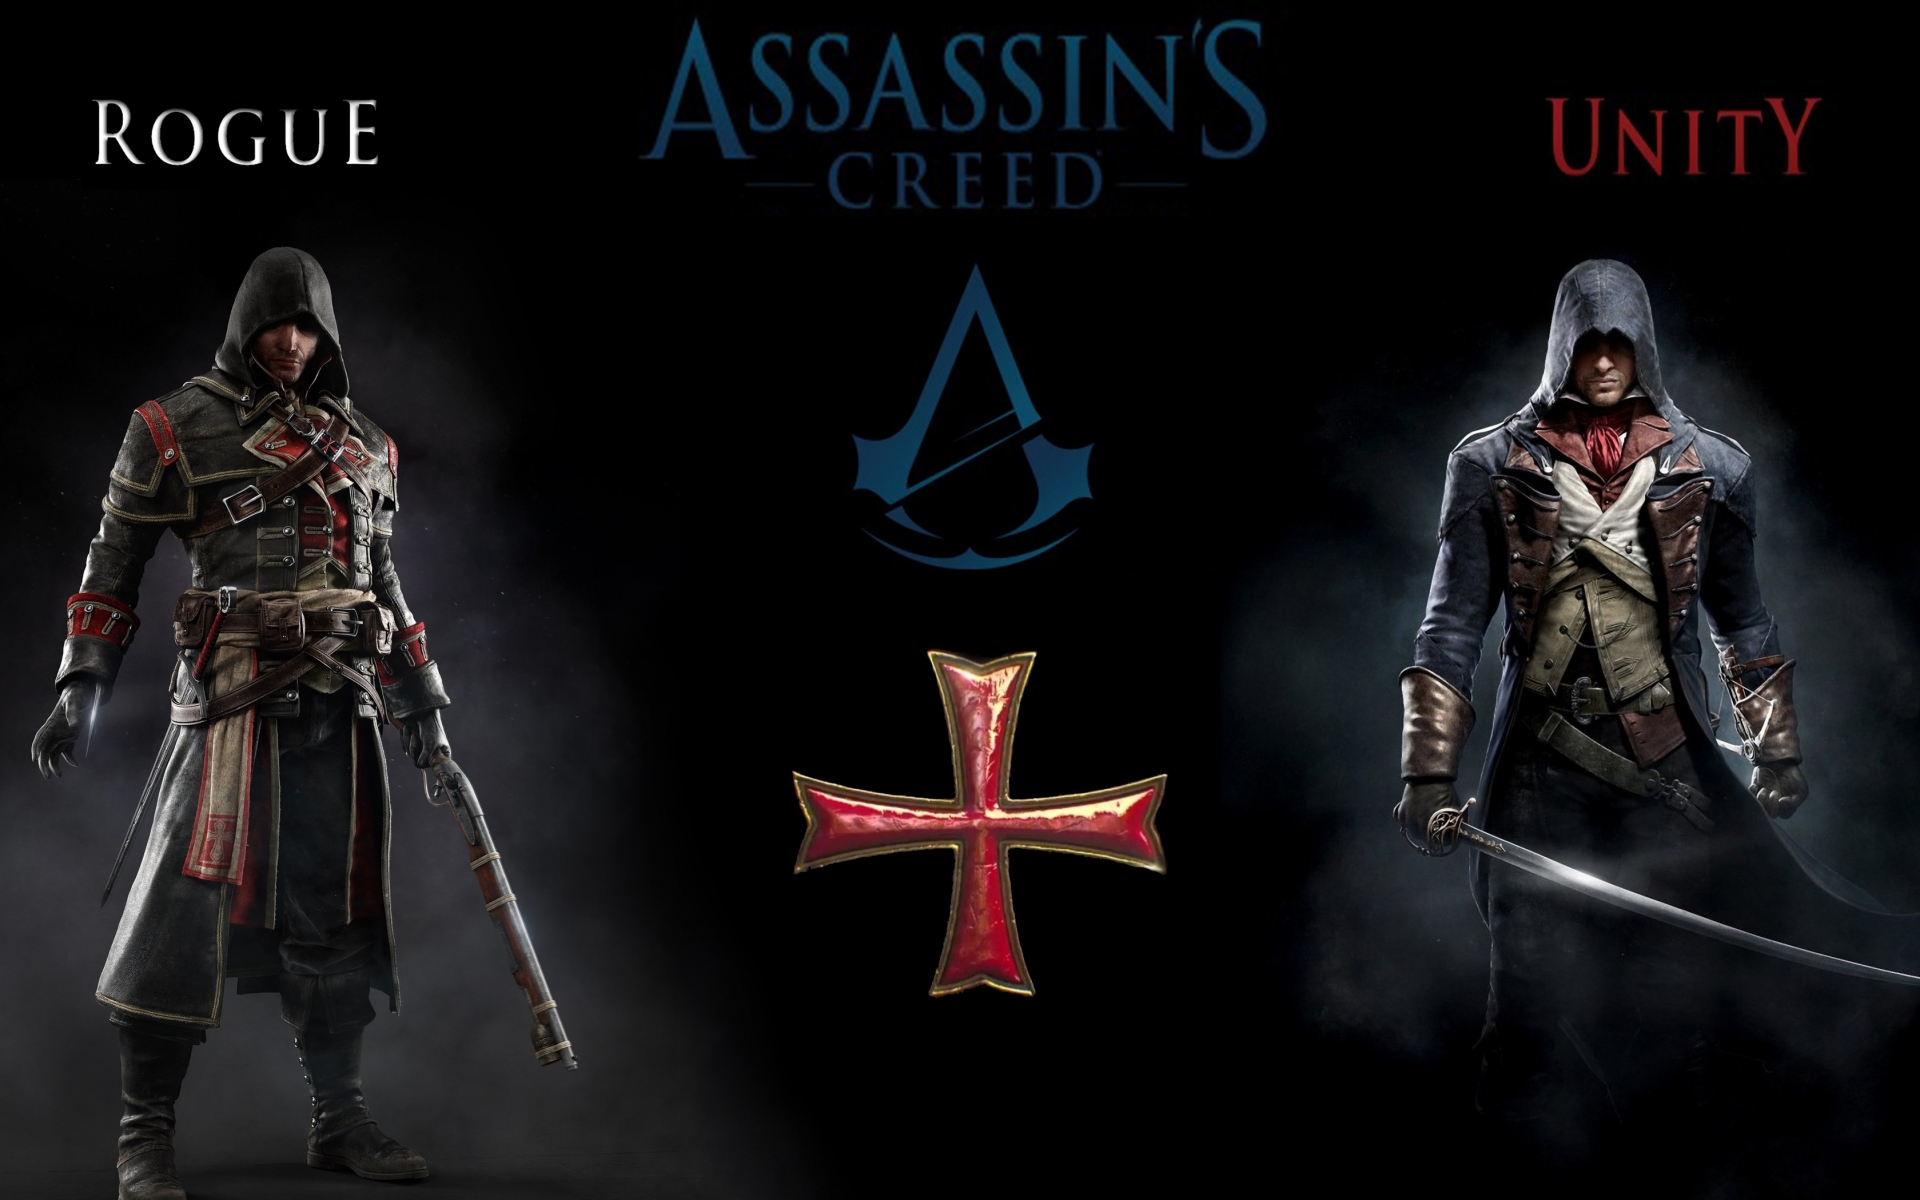 Wallpaper 1080p Assassin S Creed Unity Rogue Video Game HD